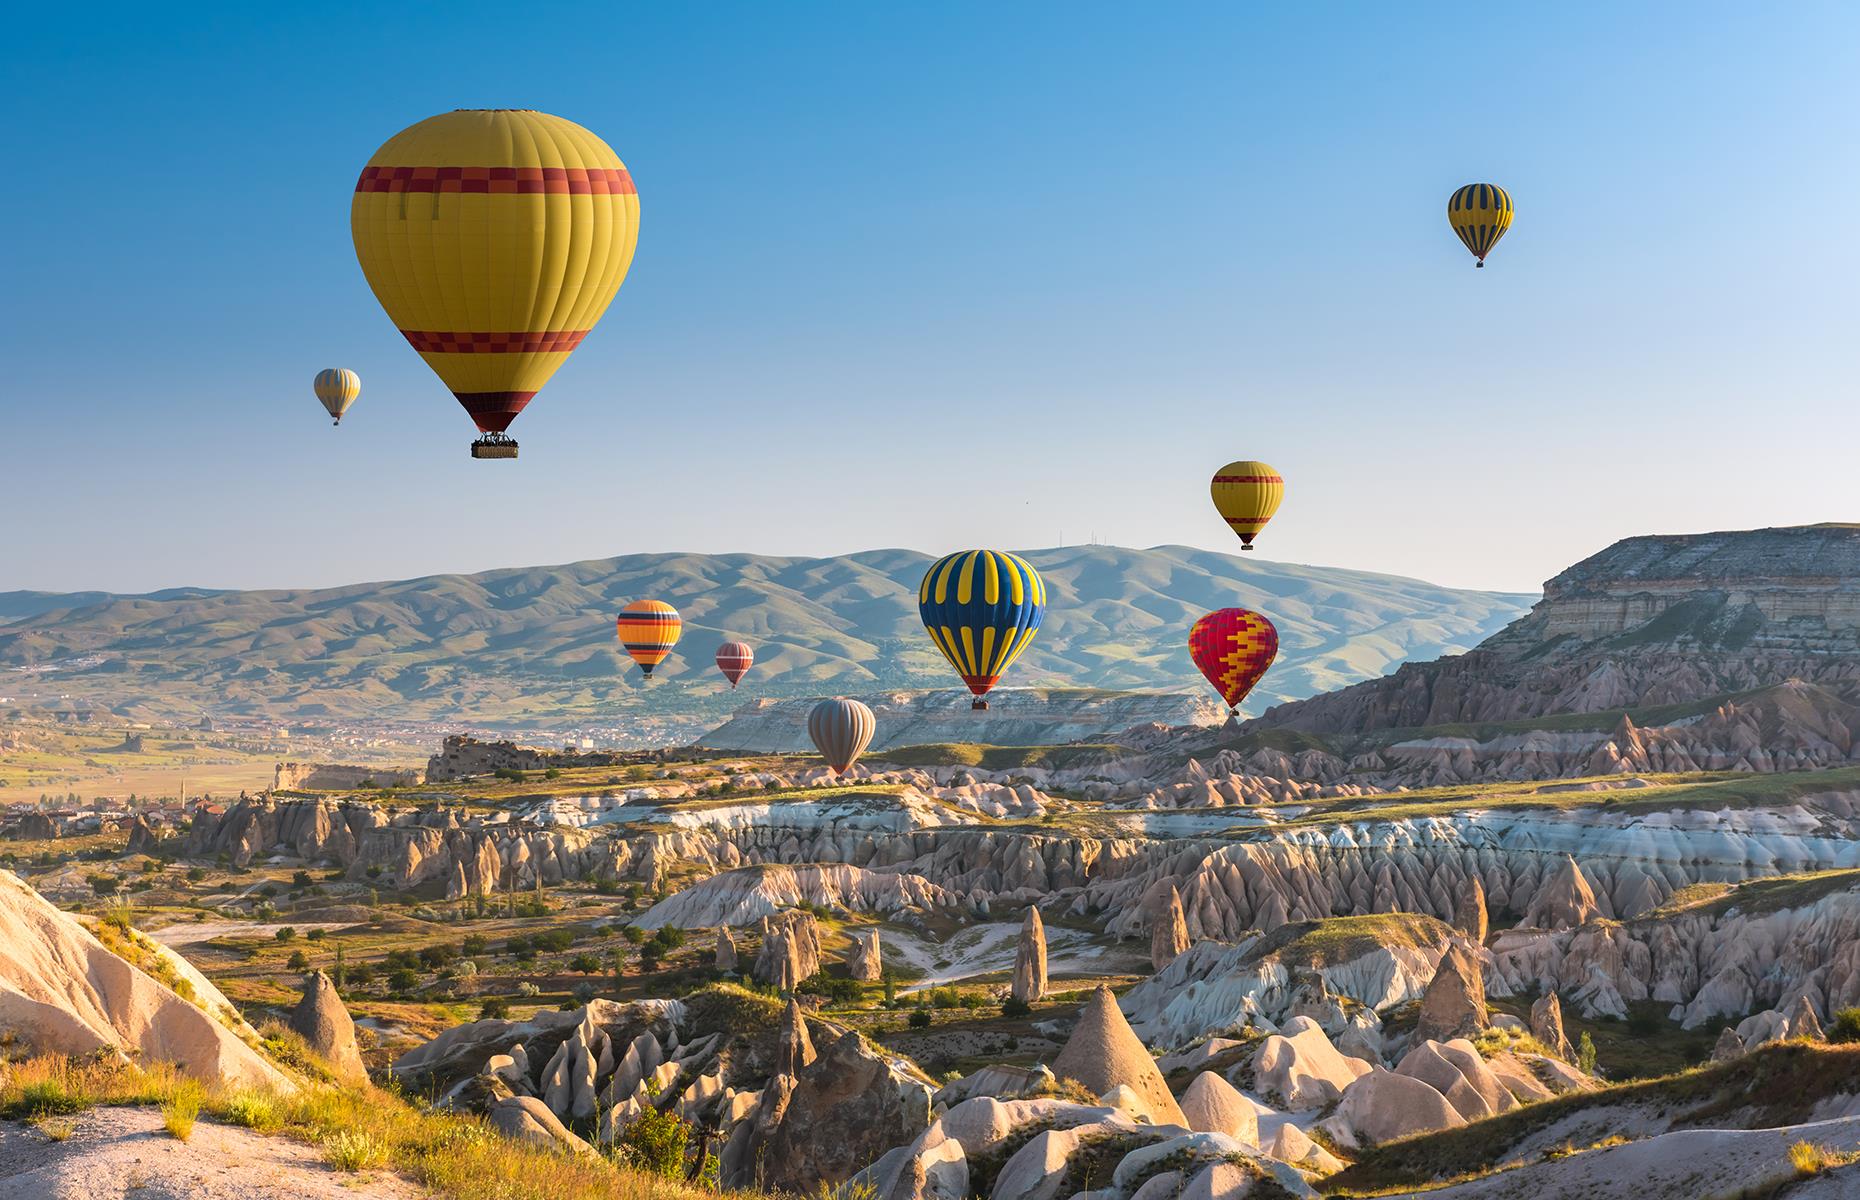 <p>Cappadocia's surreal landscapes, decorated by unique rock formations, make for a spectacular hot air balloon ride. Fly over the impressive valleys, see local orchards and vineyards and experience breathtaking sunsets. </p>  <p><strong><a href="https://www.loveexploring.com/gallerylist/81915/the-worlds-most-incredible-hot-air-balloon-rides">These are the world's most incredible hot air balloon rides</a></strong></p>